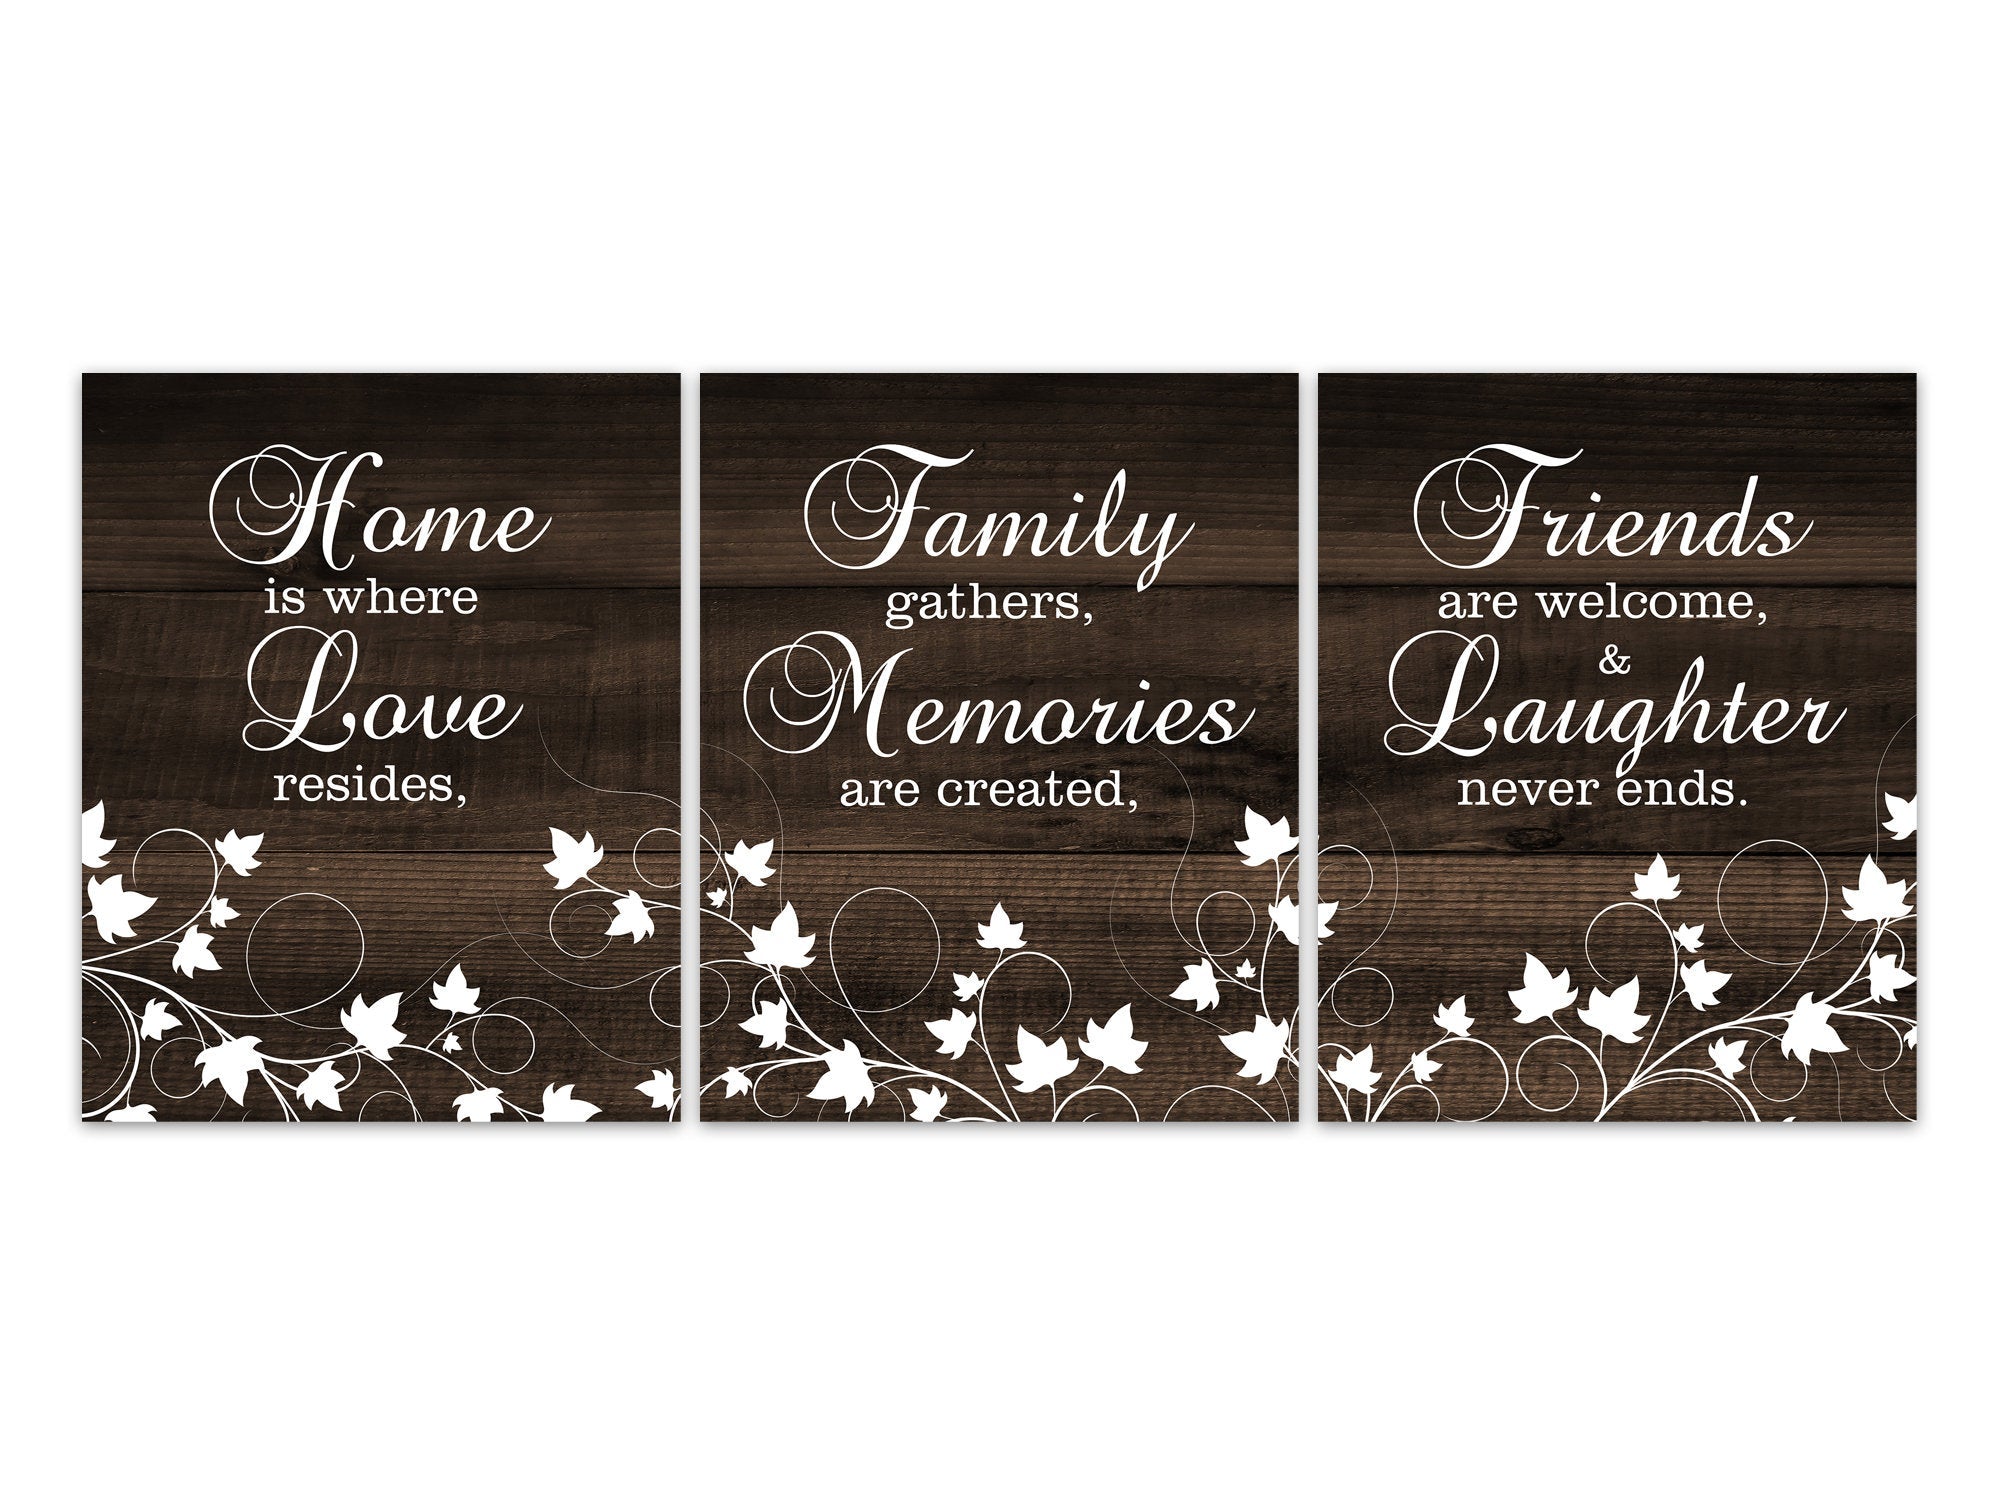 Home is Where Love Resides Signs, Rustic Home Decor CANVAS or PRINTS, Family Quote Art, Farmhouse Dcor, Dining Room Artwork - HOME430